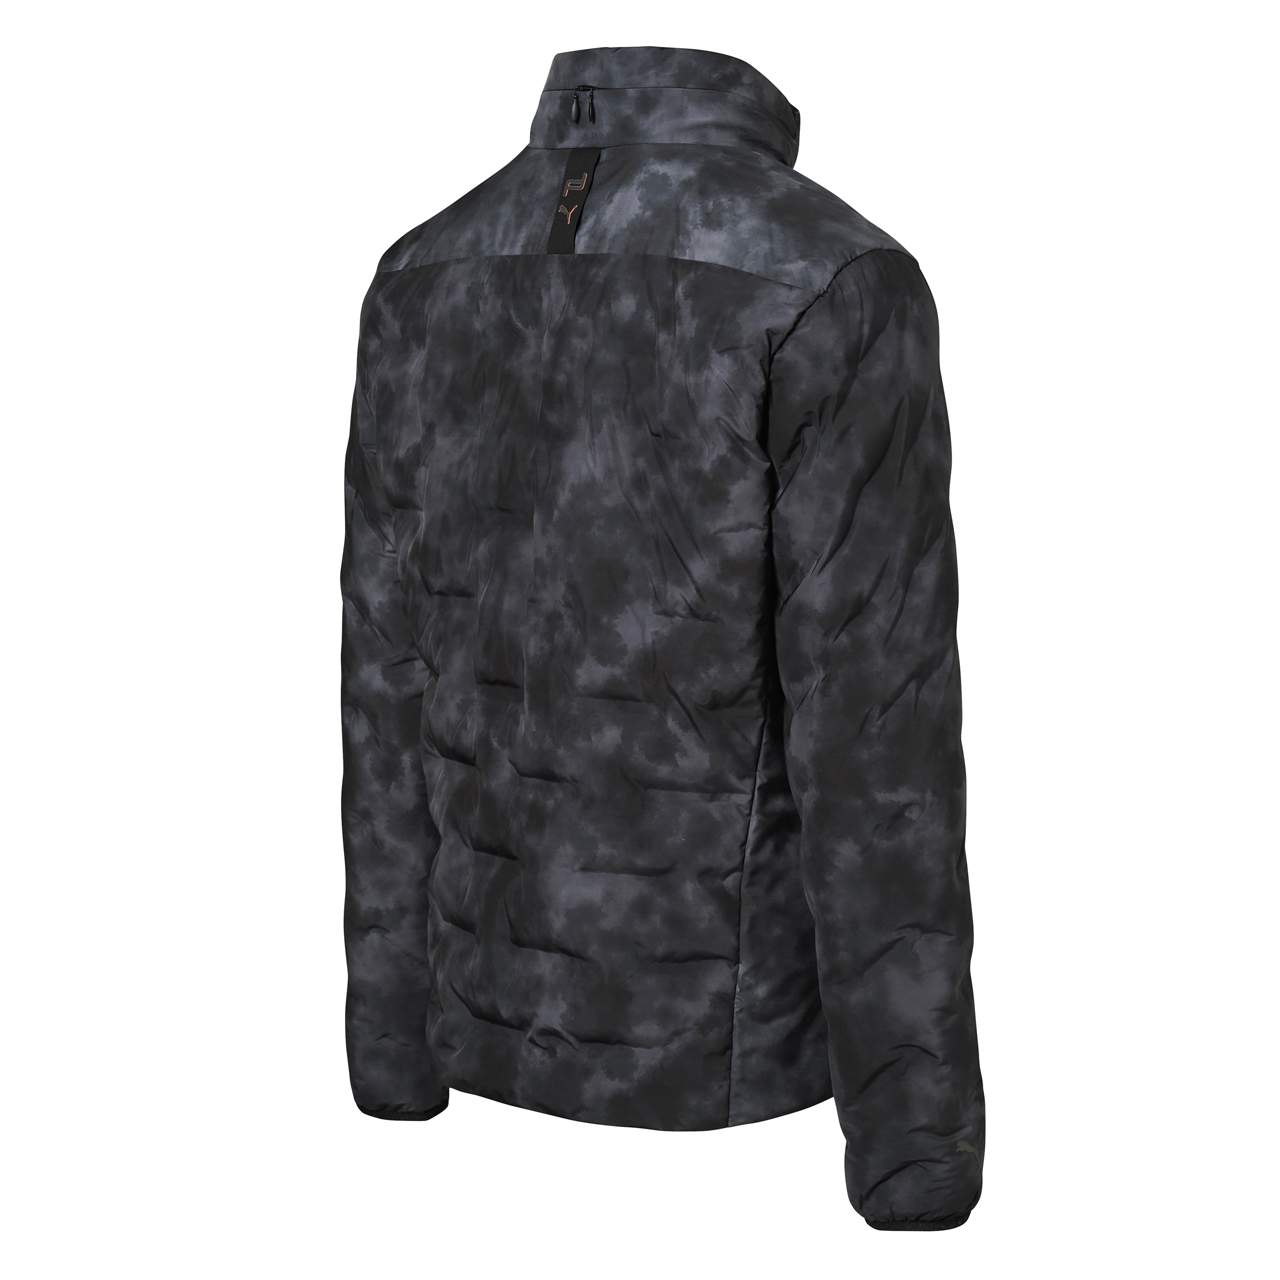 Lightweight Graphic Padded Jacket - Luxury Functional Jackets for Men ...